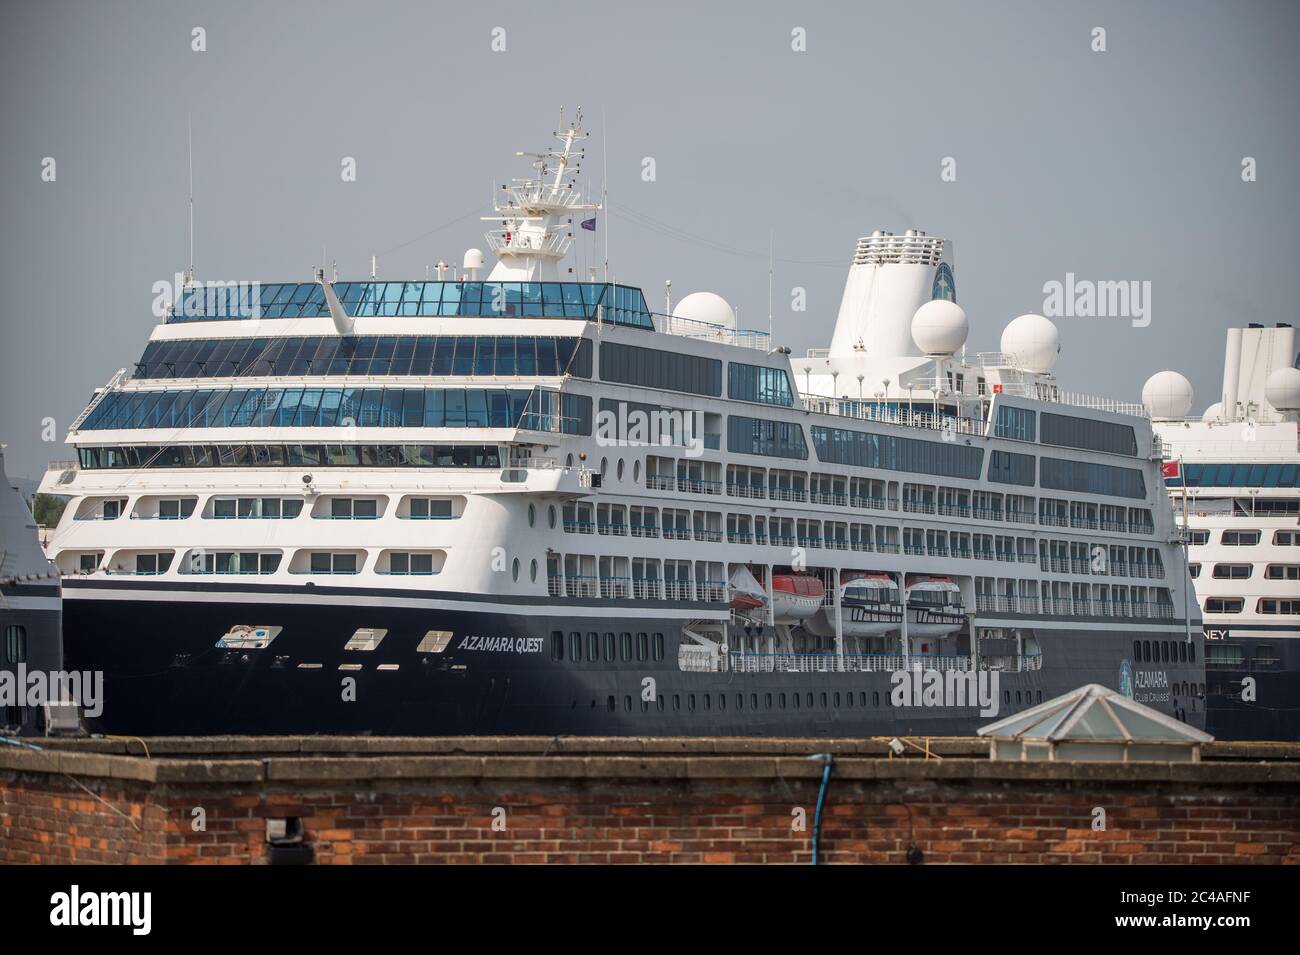 Glasgow, UK. 25th June, 2020. Picture: Azamara Quest Cruise Ship seen berthed in King George V Dock near Shieldhall in Glasgow. Due to the Coronavirus (COVID19) crisis, the cruise ships have berthed in Glasgow. Credit: Colin Fisher/Alamy Live News Stock Photo